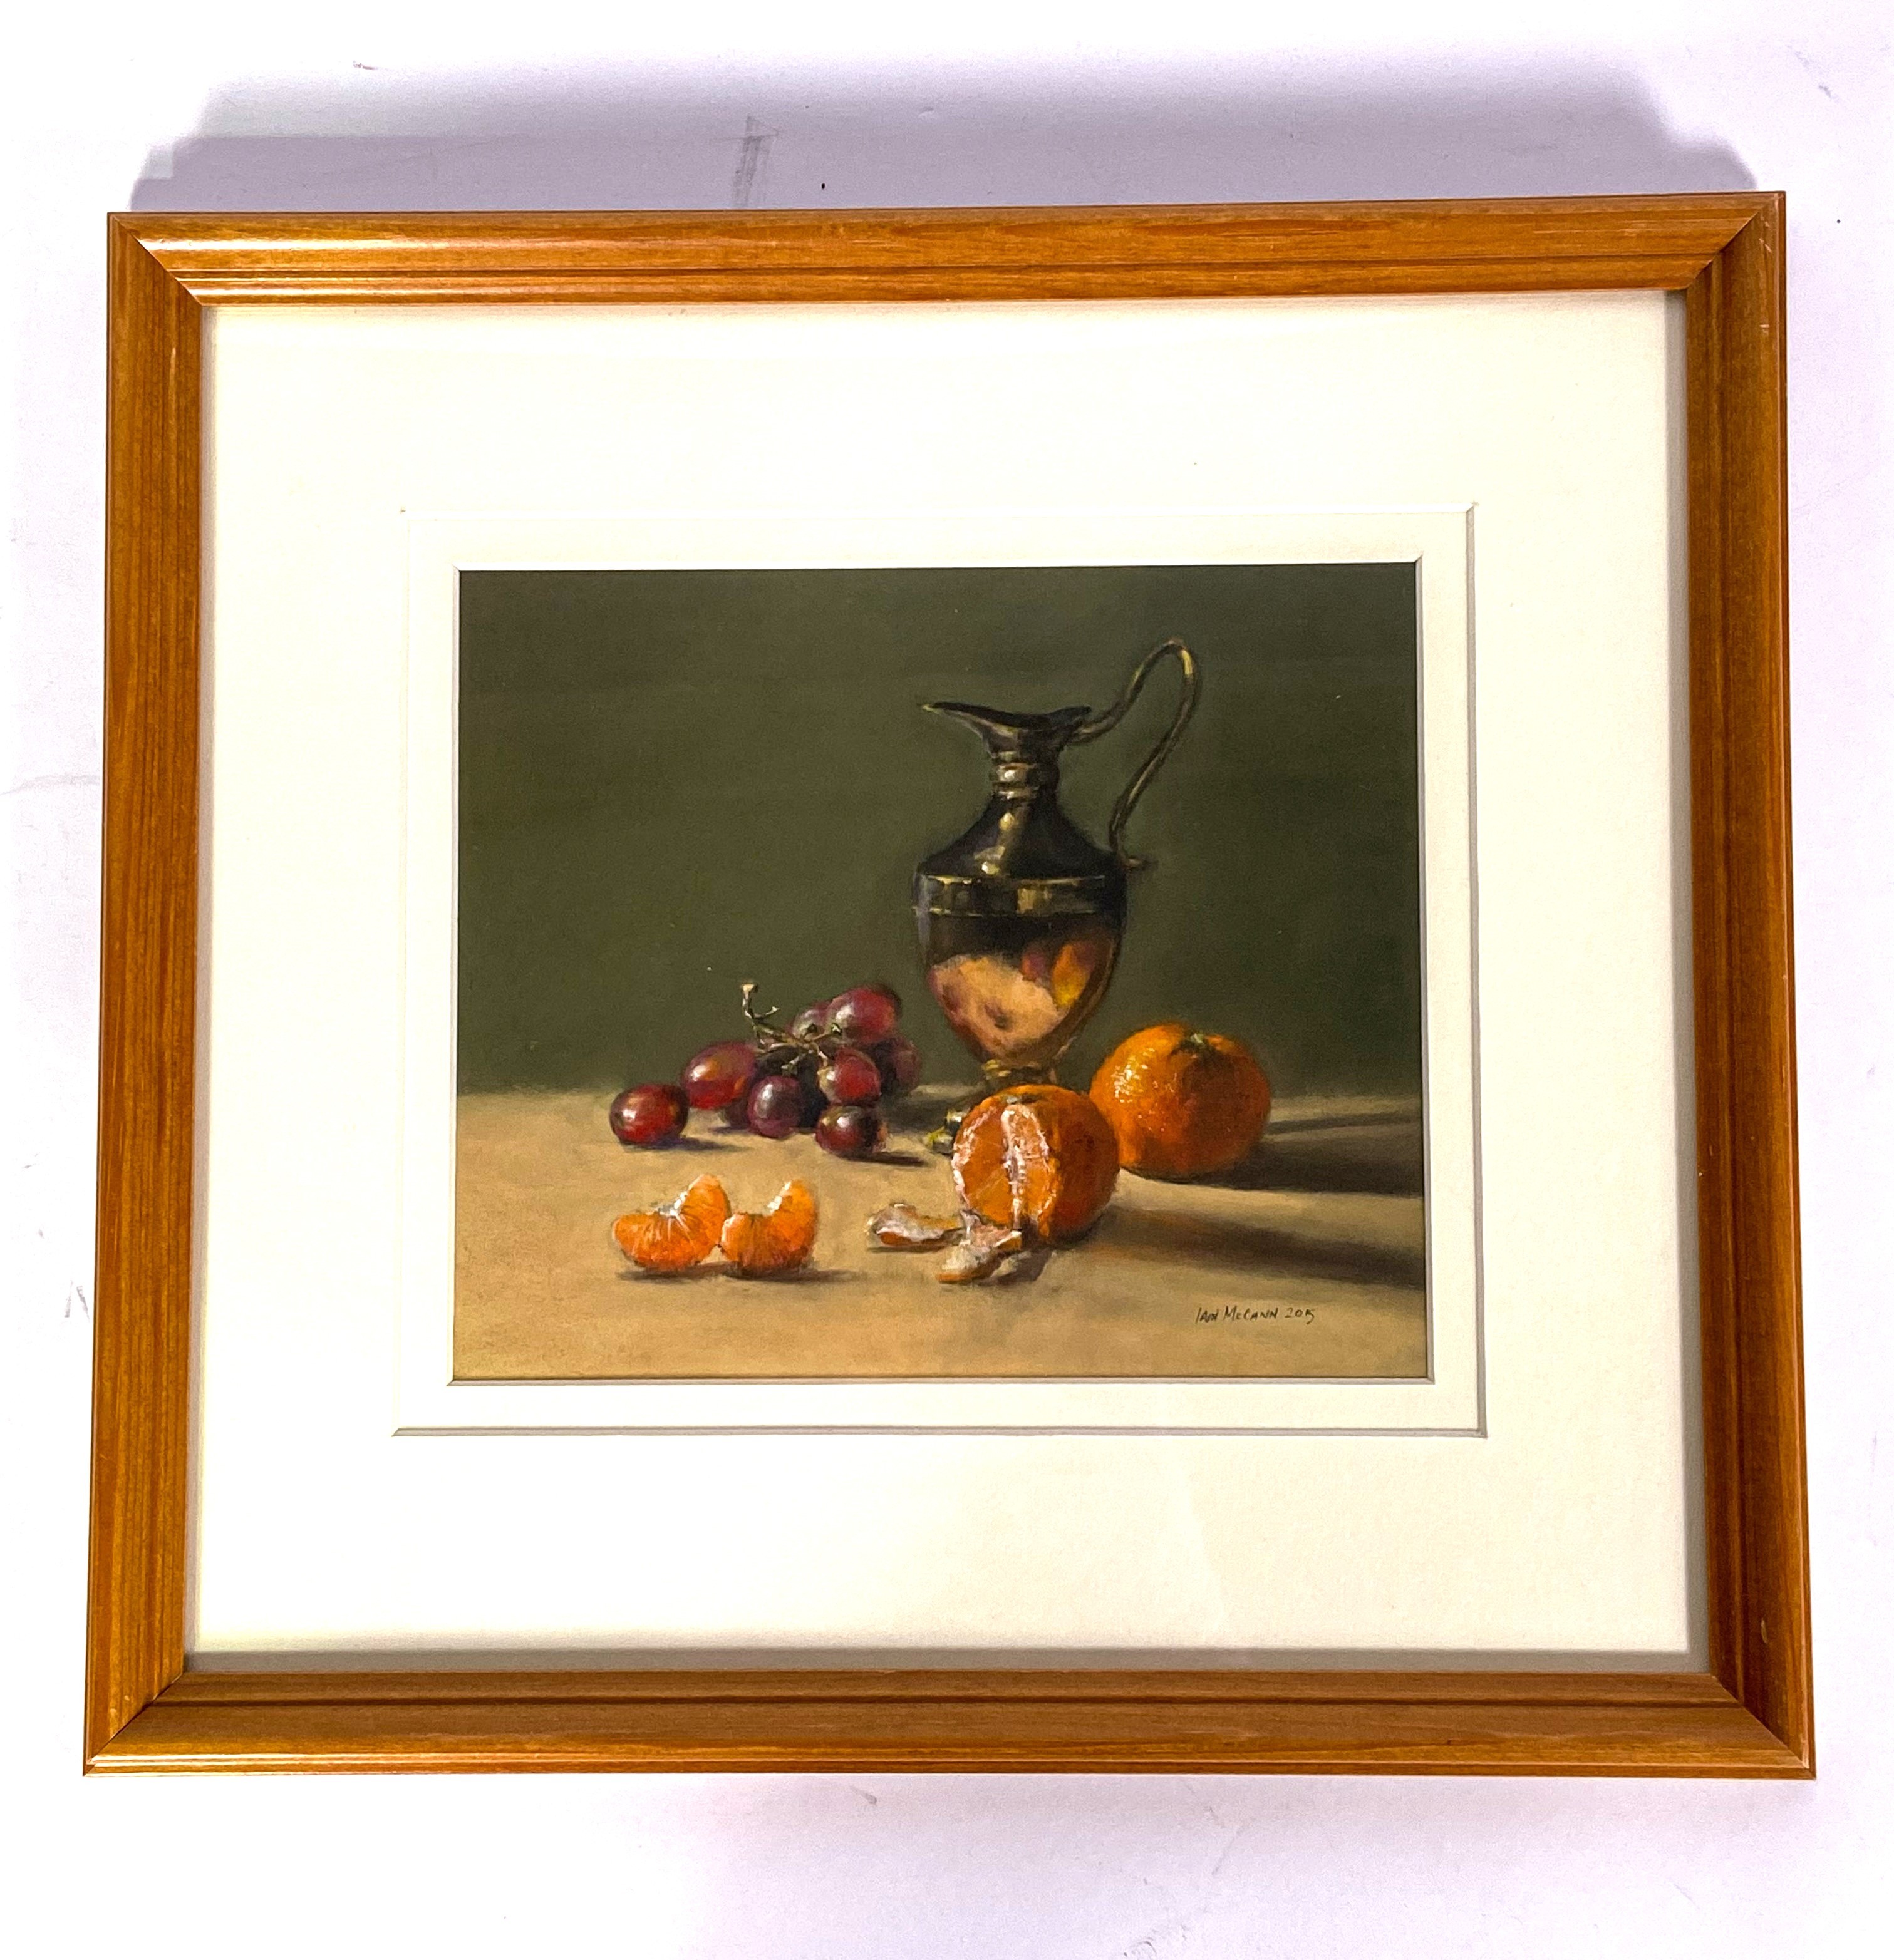 Four pictures, including Still Life of a Ewer, with Tangerines and Grapes, sign Iain McCann, 2015; - Image 6 of 6